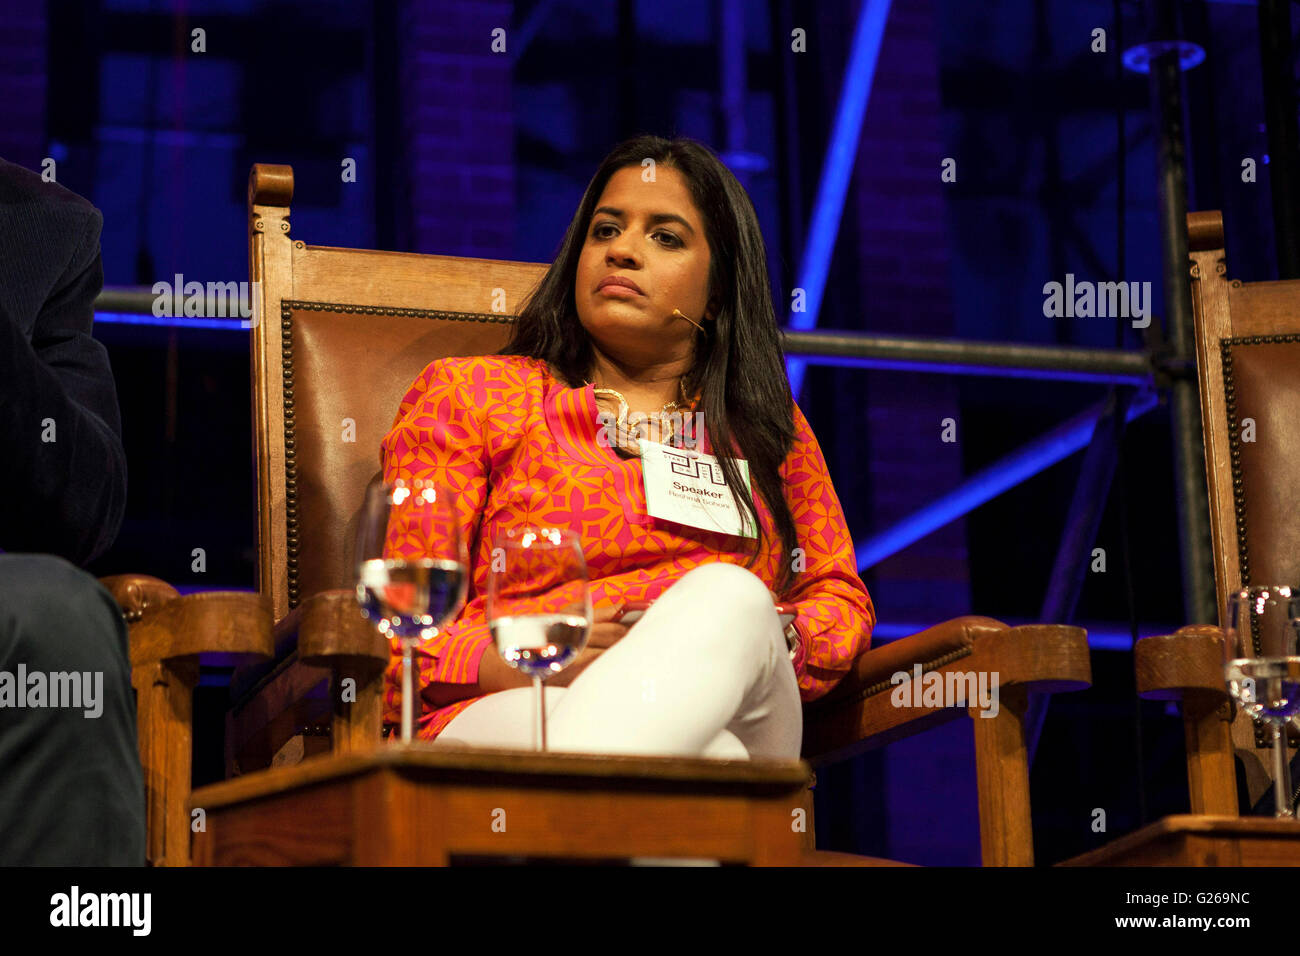 Reshma Sohoni (Seedcamp) at the panel with Mattias Ljungman (Atomico) and Carmen Bermejo (Tetuan Valley) at Startup Fest Europe held in Amsterdam, The Netherlands on May 24, 2016. The Startup Fest Europe gathers international experts to discuss the latest innovations, products and services in all sorts of business fields from 24 to 28 May 2016. Photo: Maysun/dpa Stock Photo